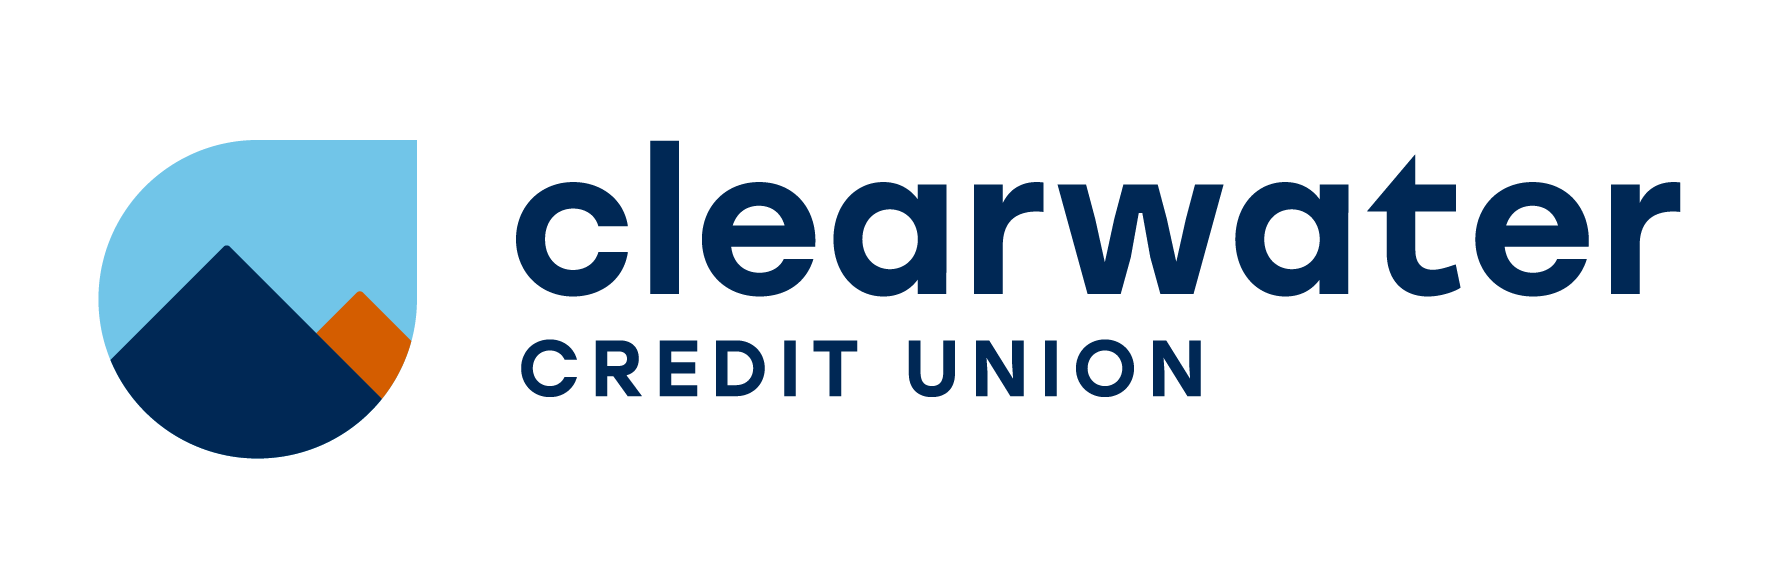 Clearwater_MainLogo_RGB.png